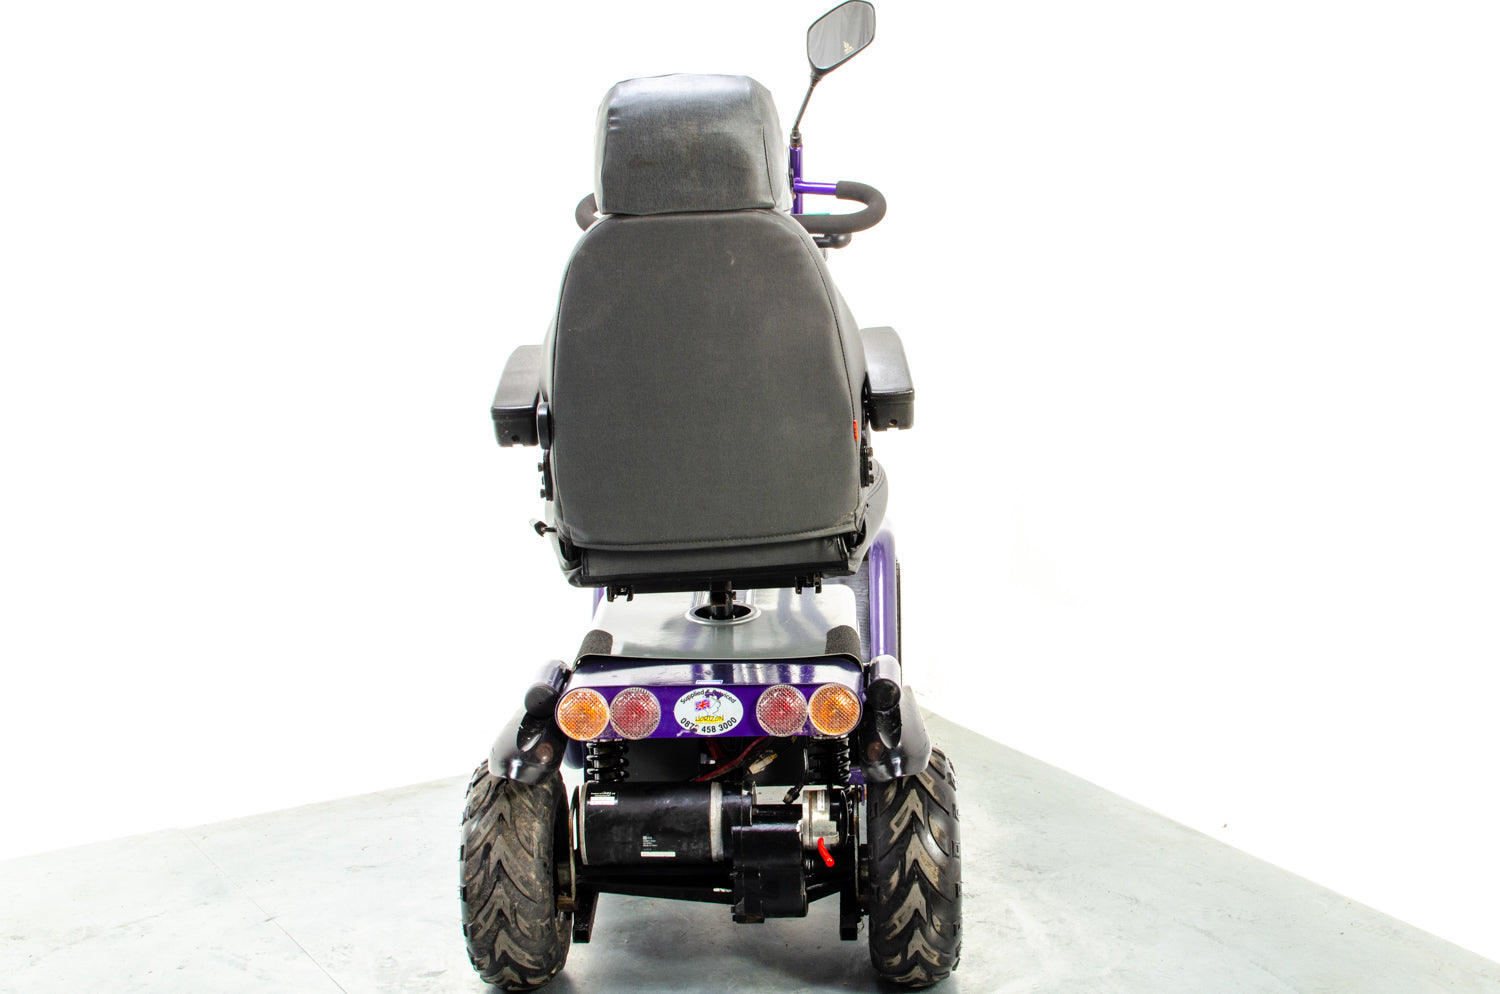 Horizon Mayan Used Mobility Scooter All-Terrain Off-Road 8mph Road Legal